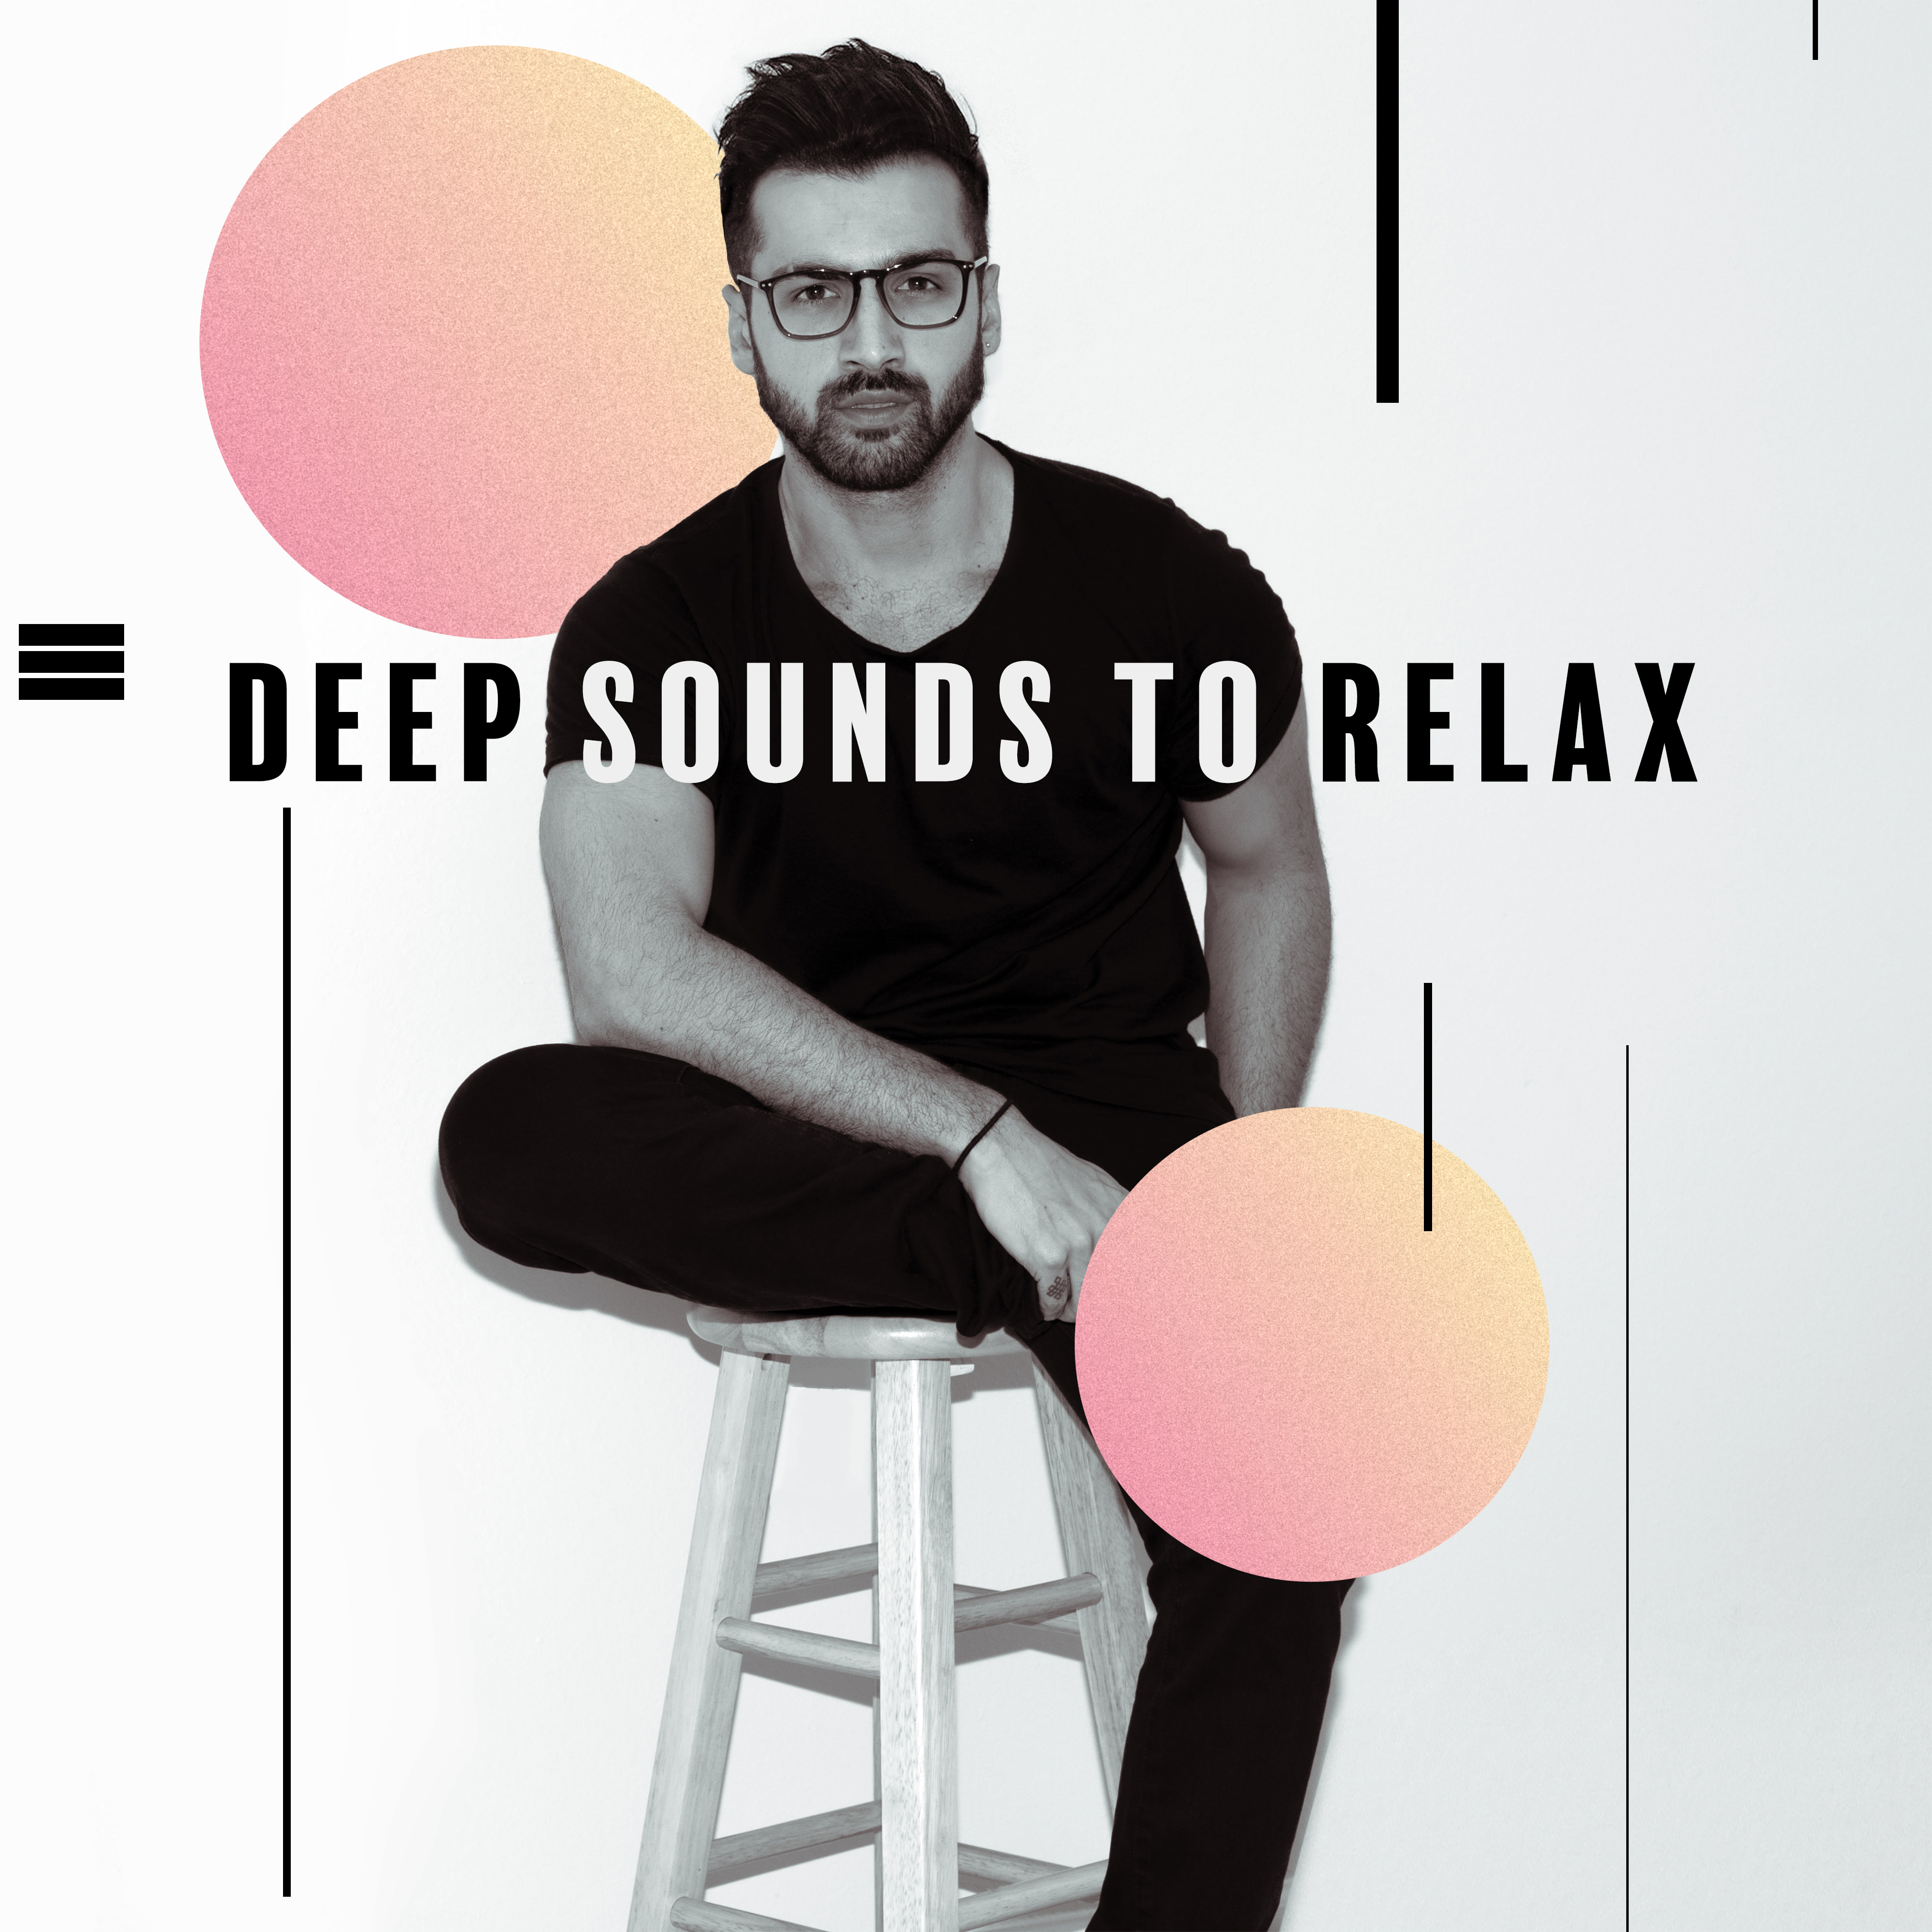 Deep Sounds to Relax: Deep Melodies for Rest, Cleansing Thoughts, Short Nap and Simple Relaxation